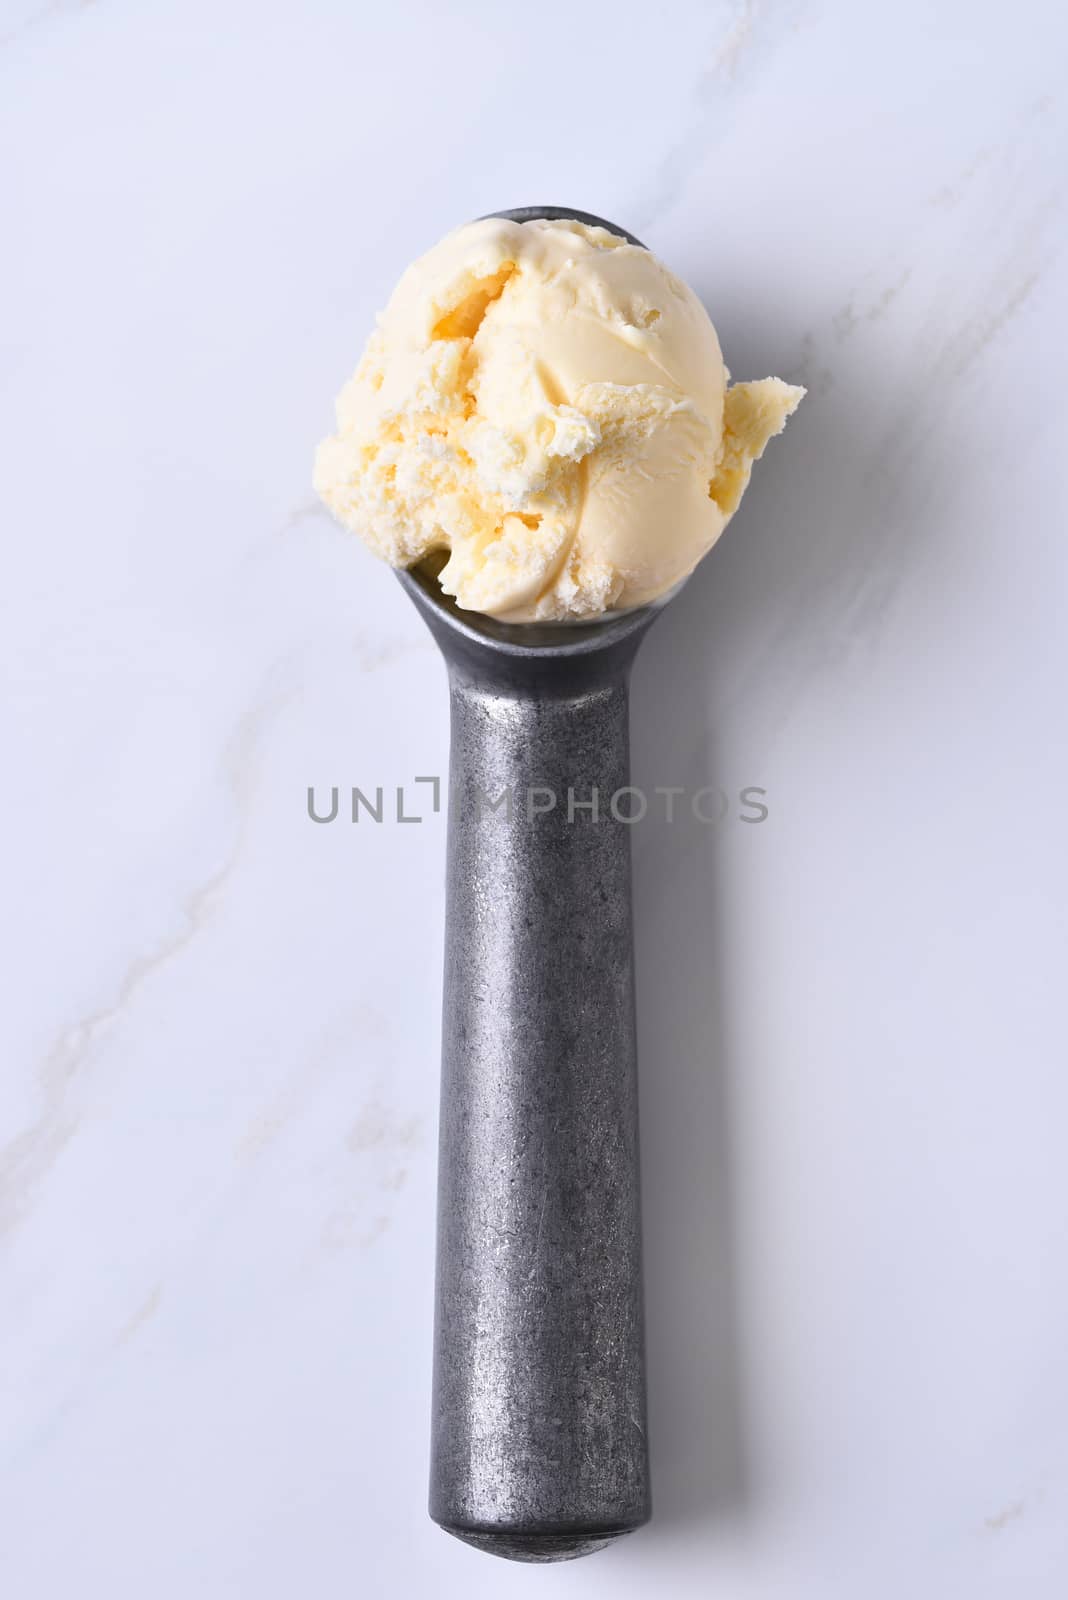 Top view of an ice cream scoop with vanilla ice cream. Vertical format on a marble counter top.